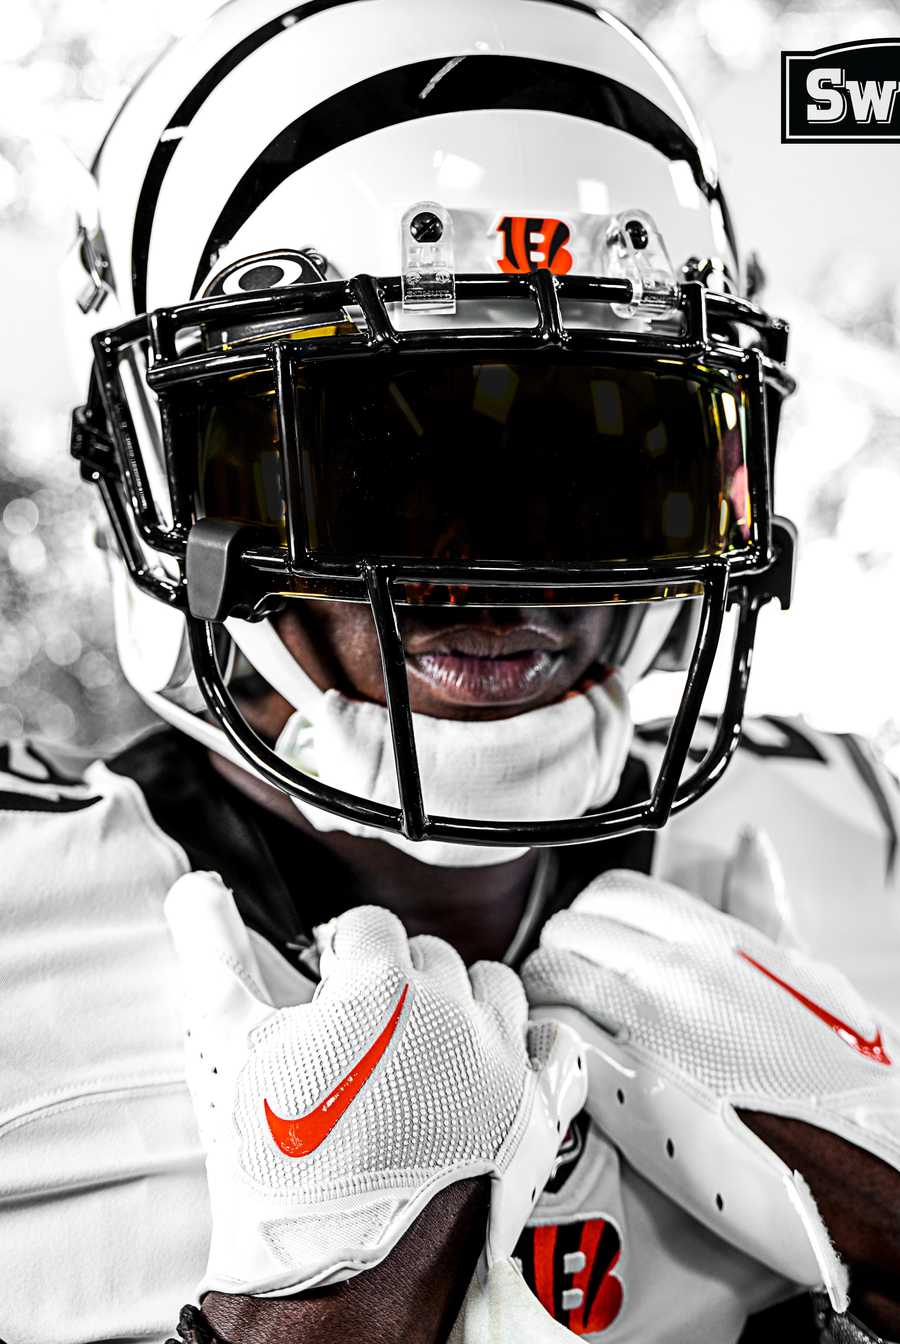 Bengals all-white uniforms, explained: What to know about 'White